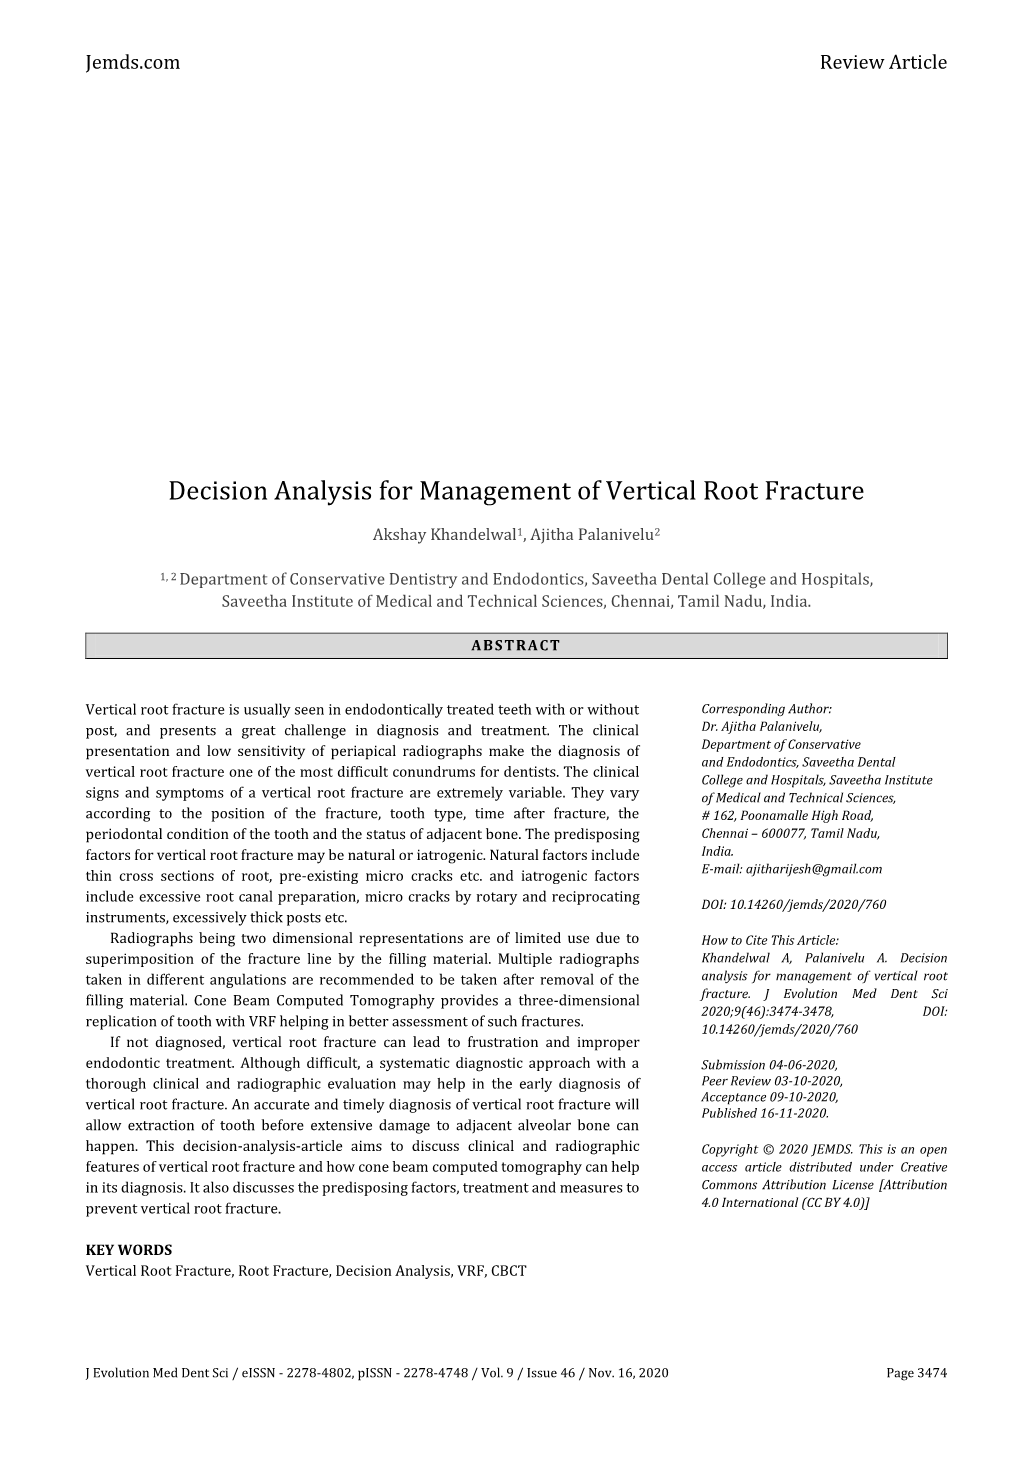 Decision Analysis for Management of Vertical Root Fracture